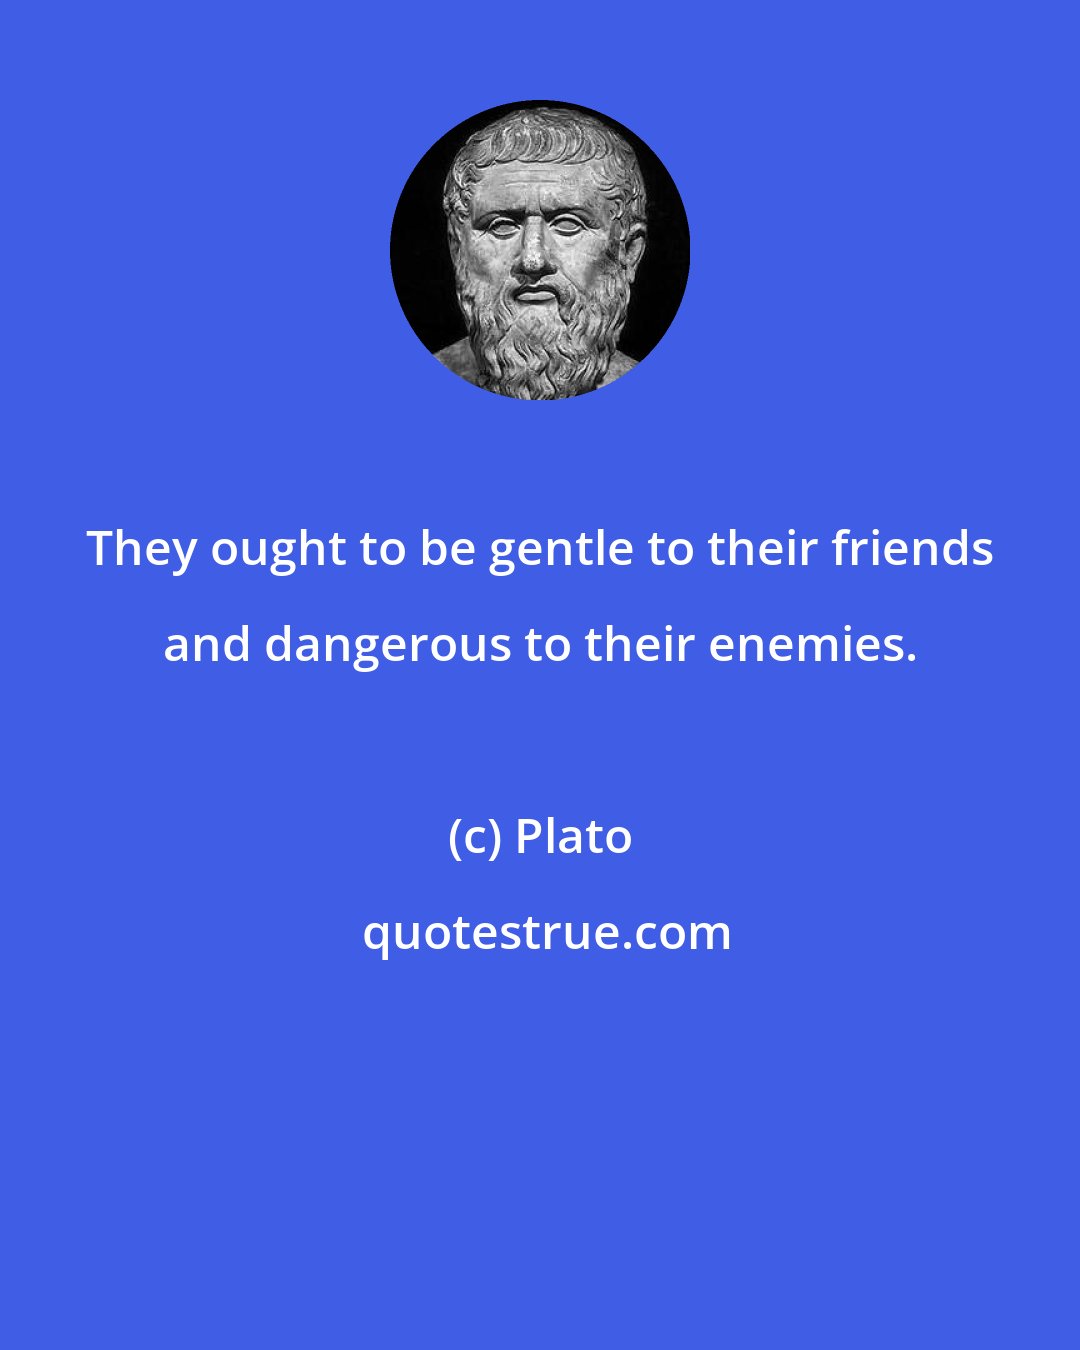 Plato: They ought to be gentle to their friends and dangerous to their enemies.